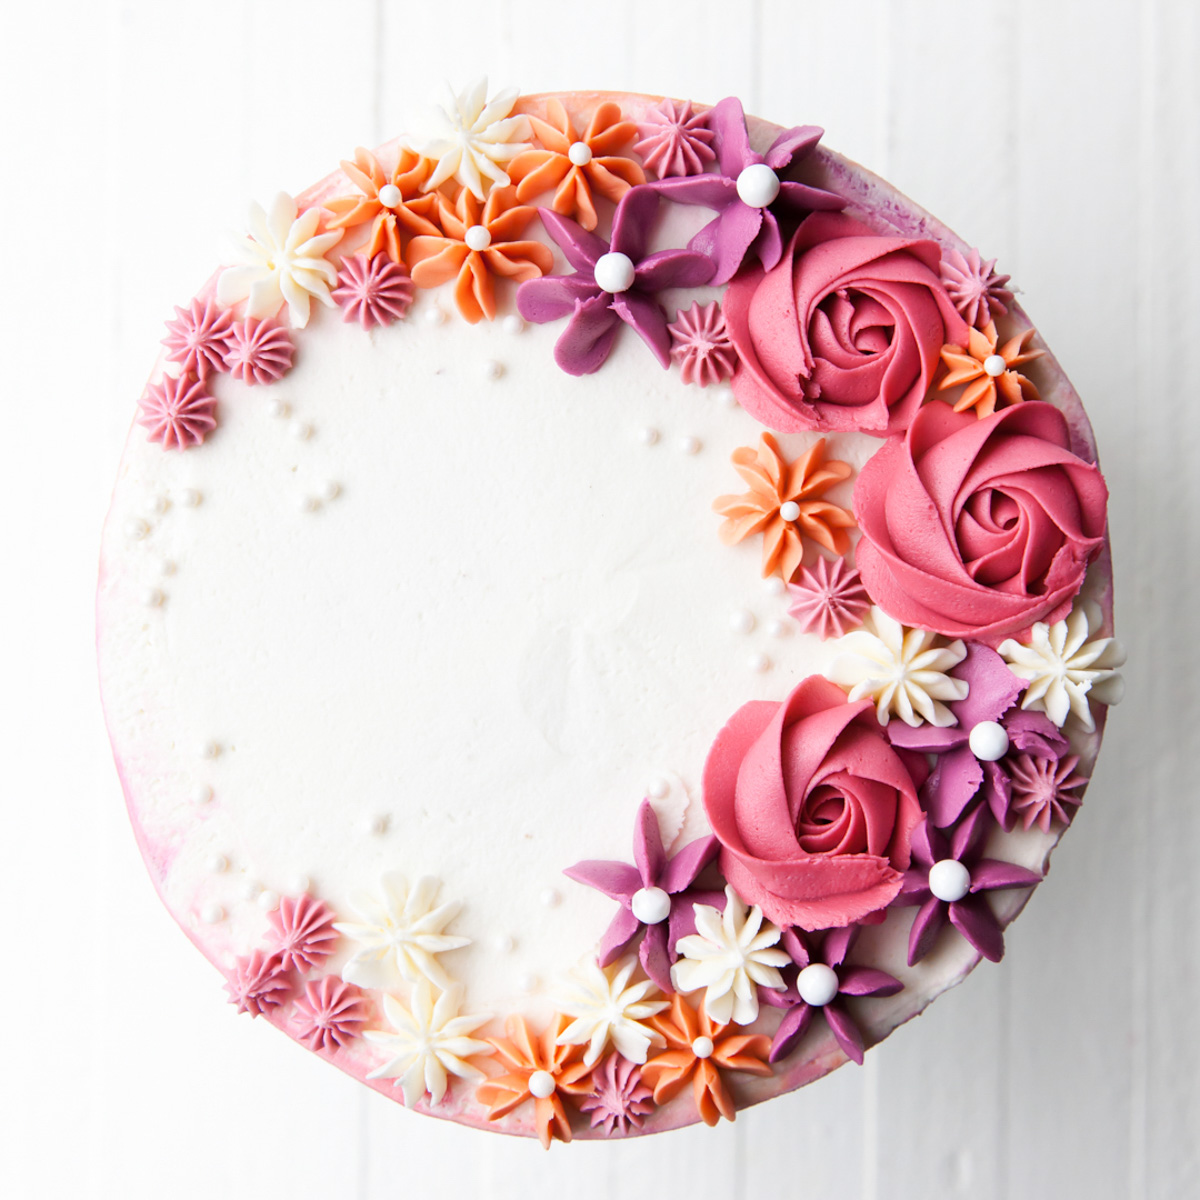 An overhear image of a cake with piped buttercream rose on top